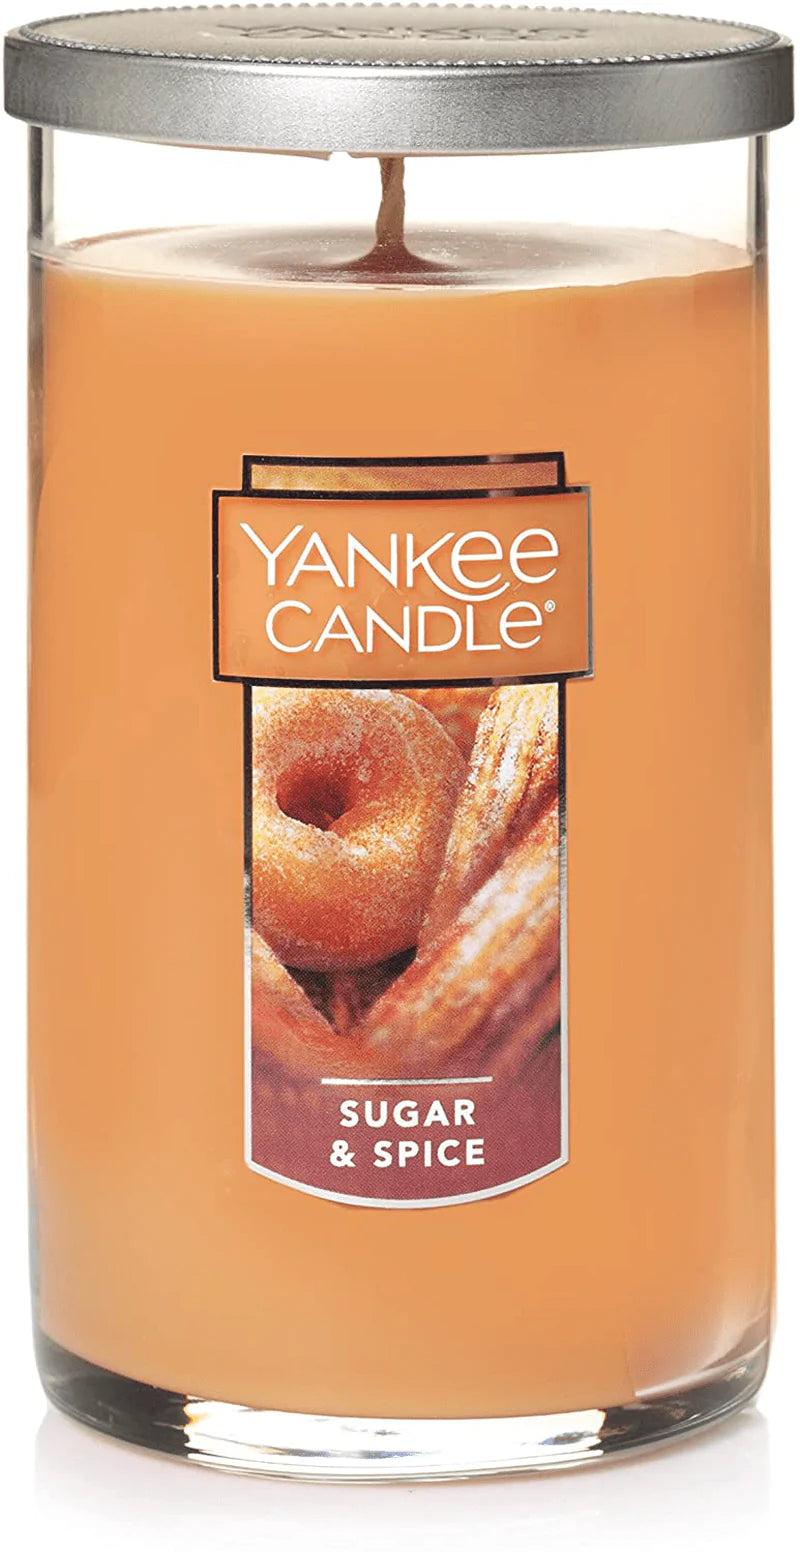 Yankee Candle Large Jar Candle Home Sweet Home Home & Garden > Decor > Home Fragrances > Candles Yankee Candle Sugar & Spice Medium Perfect Pillar 